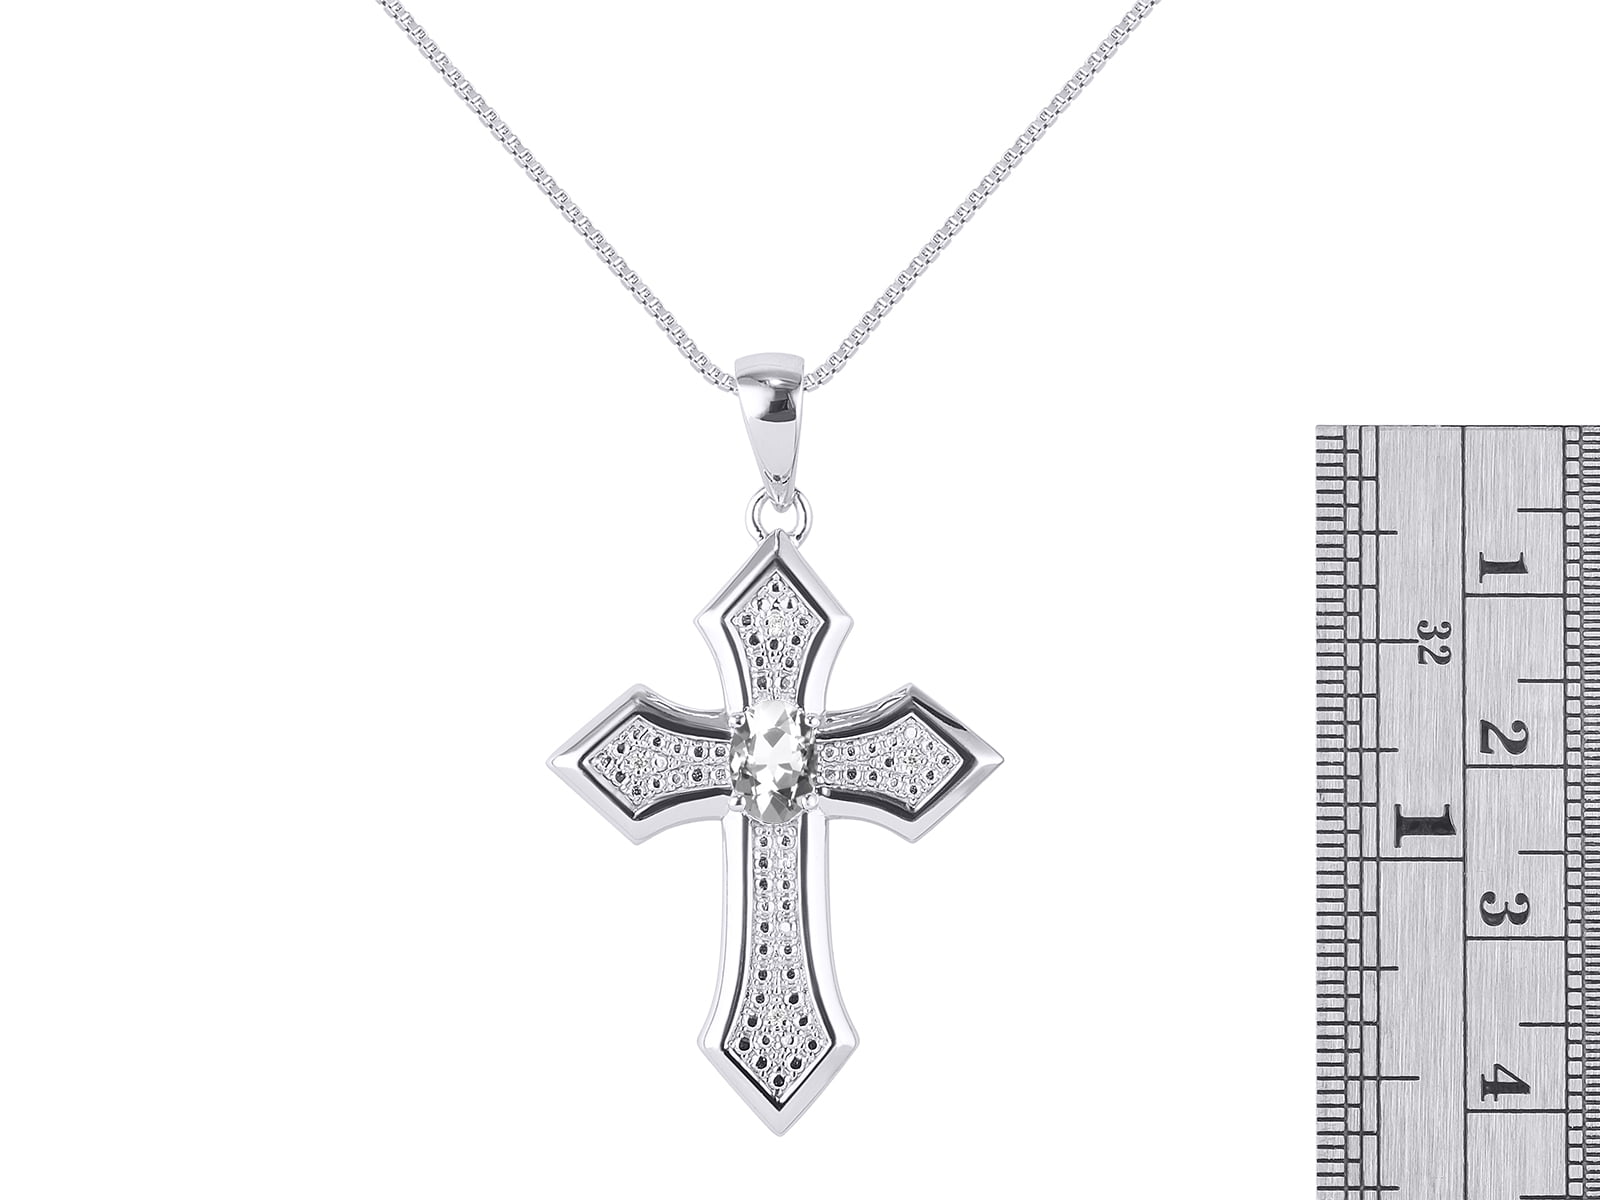 Details about   Diamond & Smoky Quartz Cross Pendant Necklace Set In Set in Sterling Silver Wit